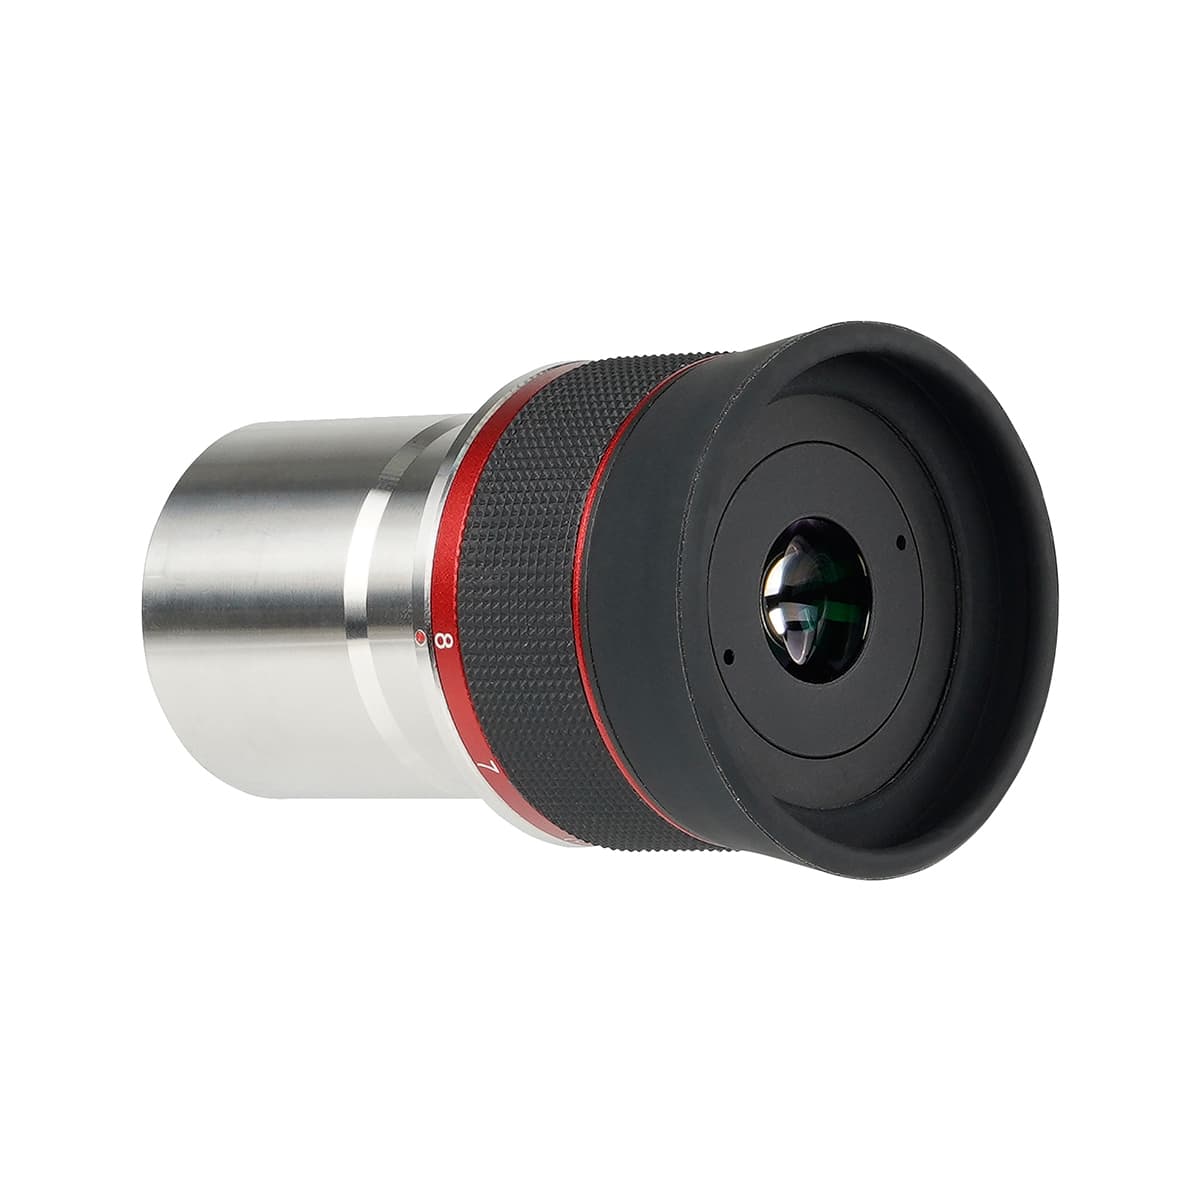 SV215 1.25" 3mm-8mm Planetary Zooms Eyepiece